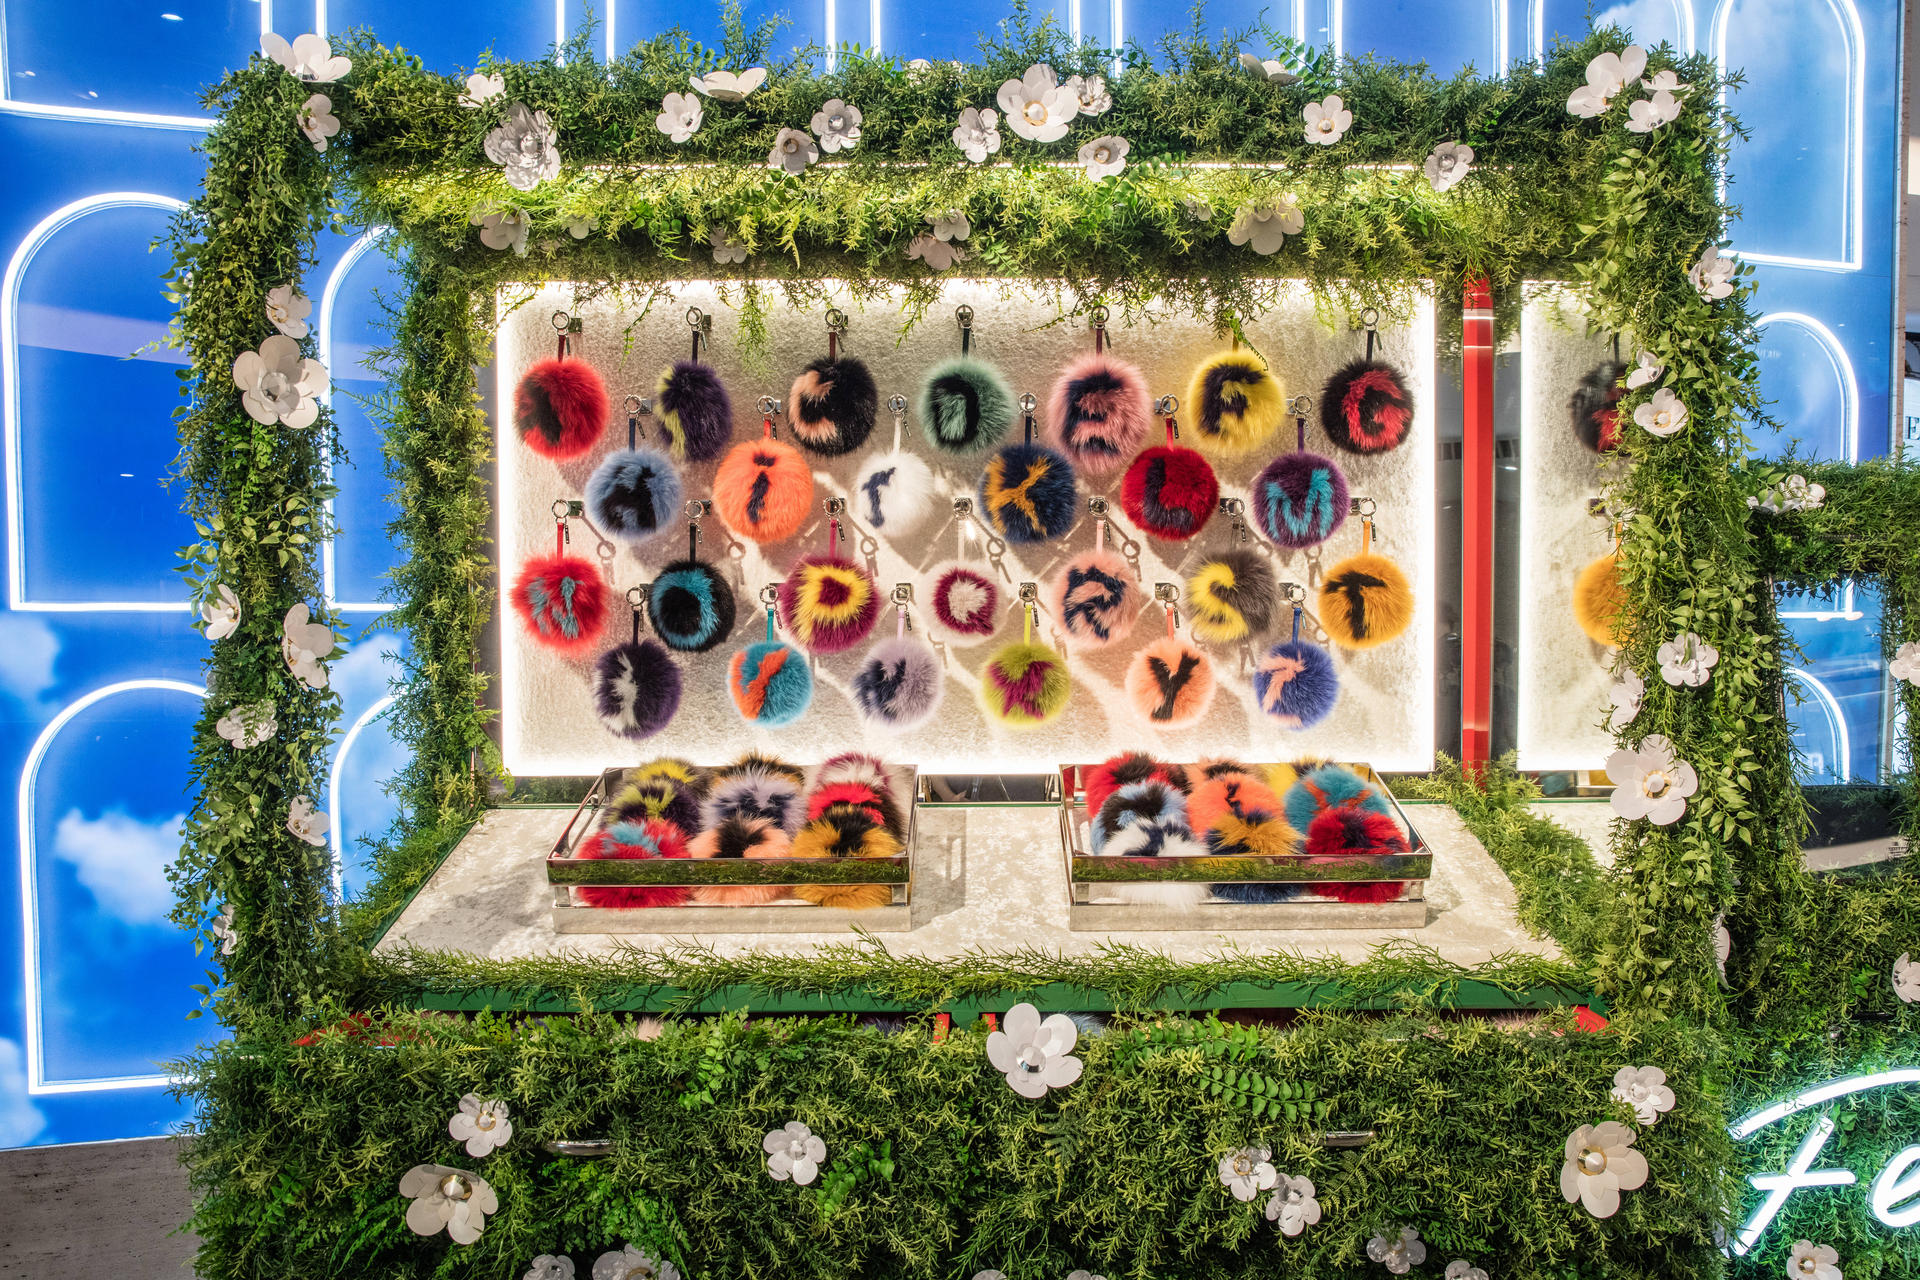 Flowerland takes over Fendi's Ginza Pop up store - Luxurylaunches